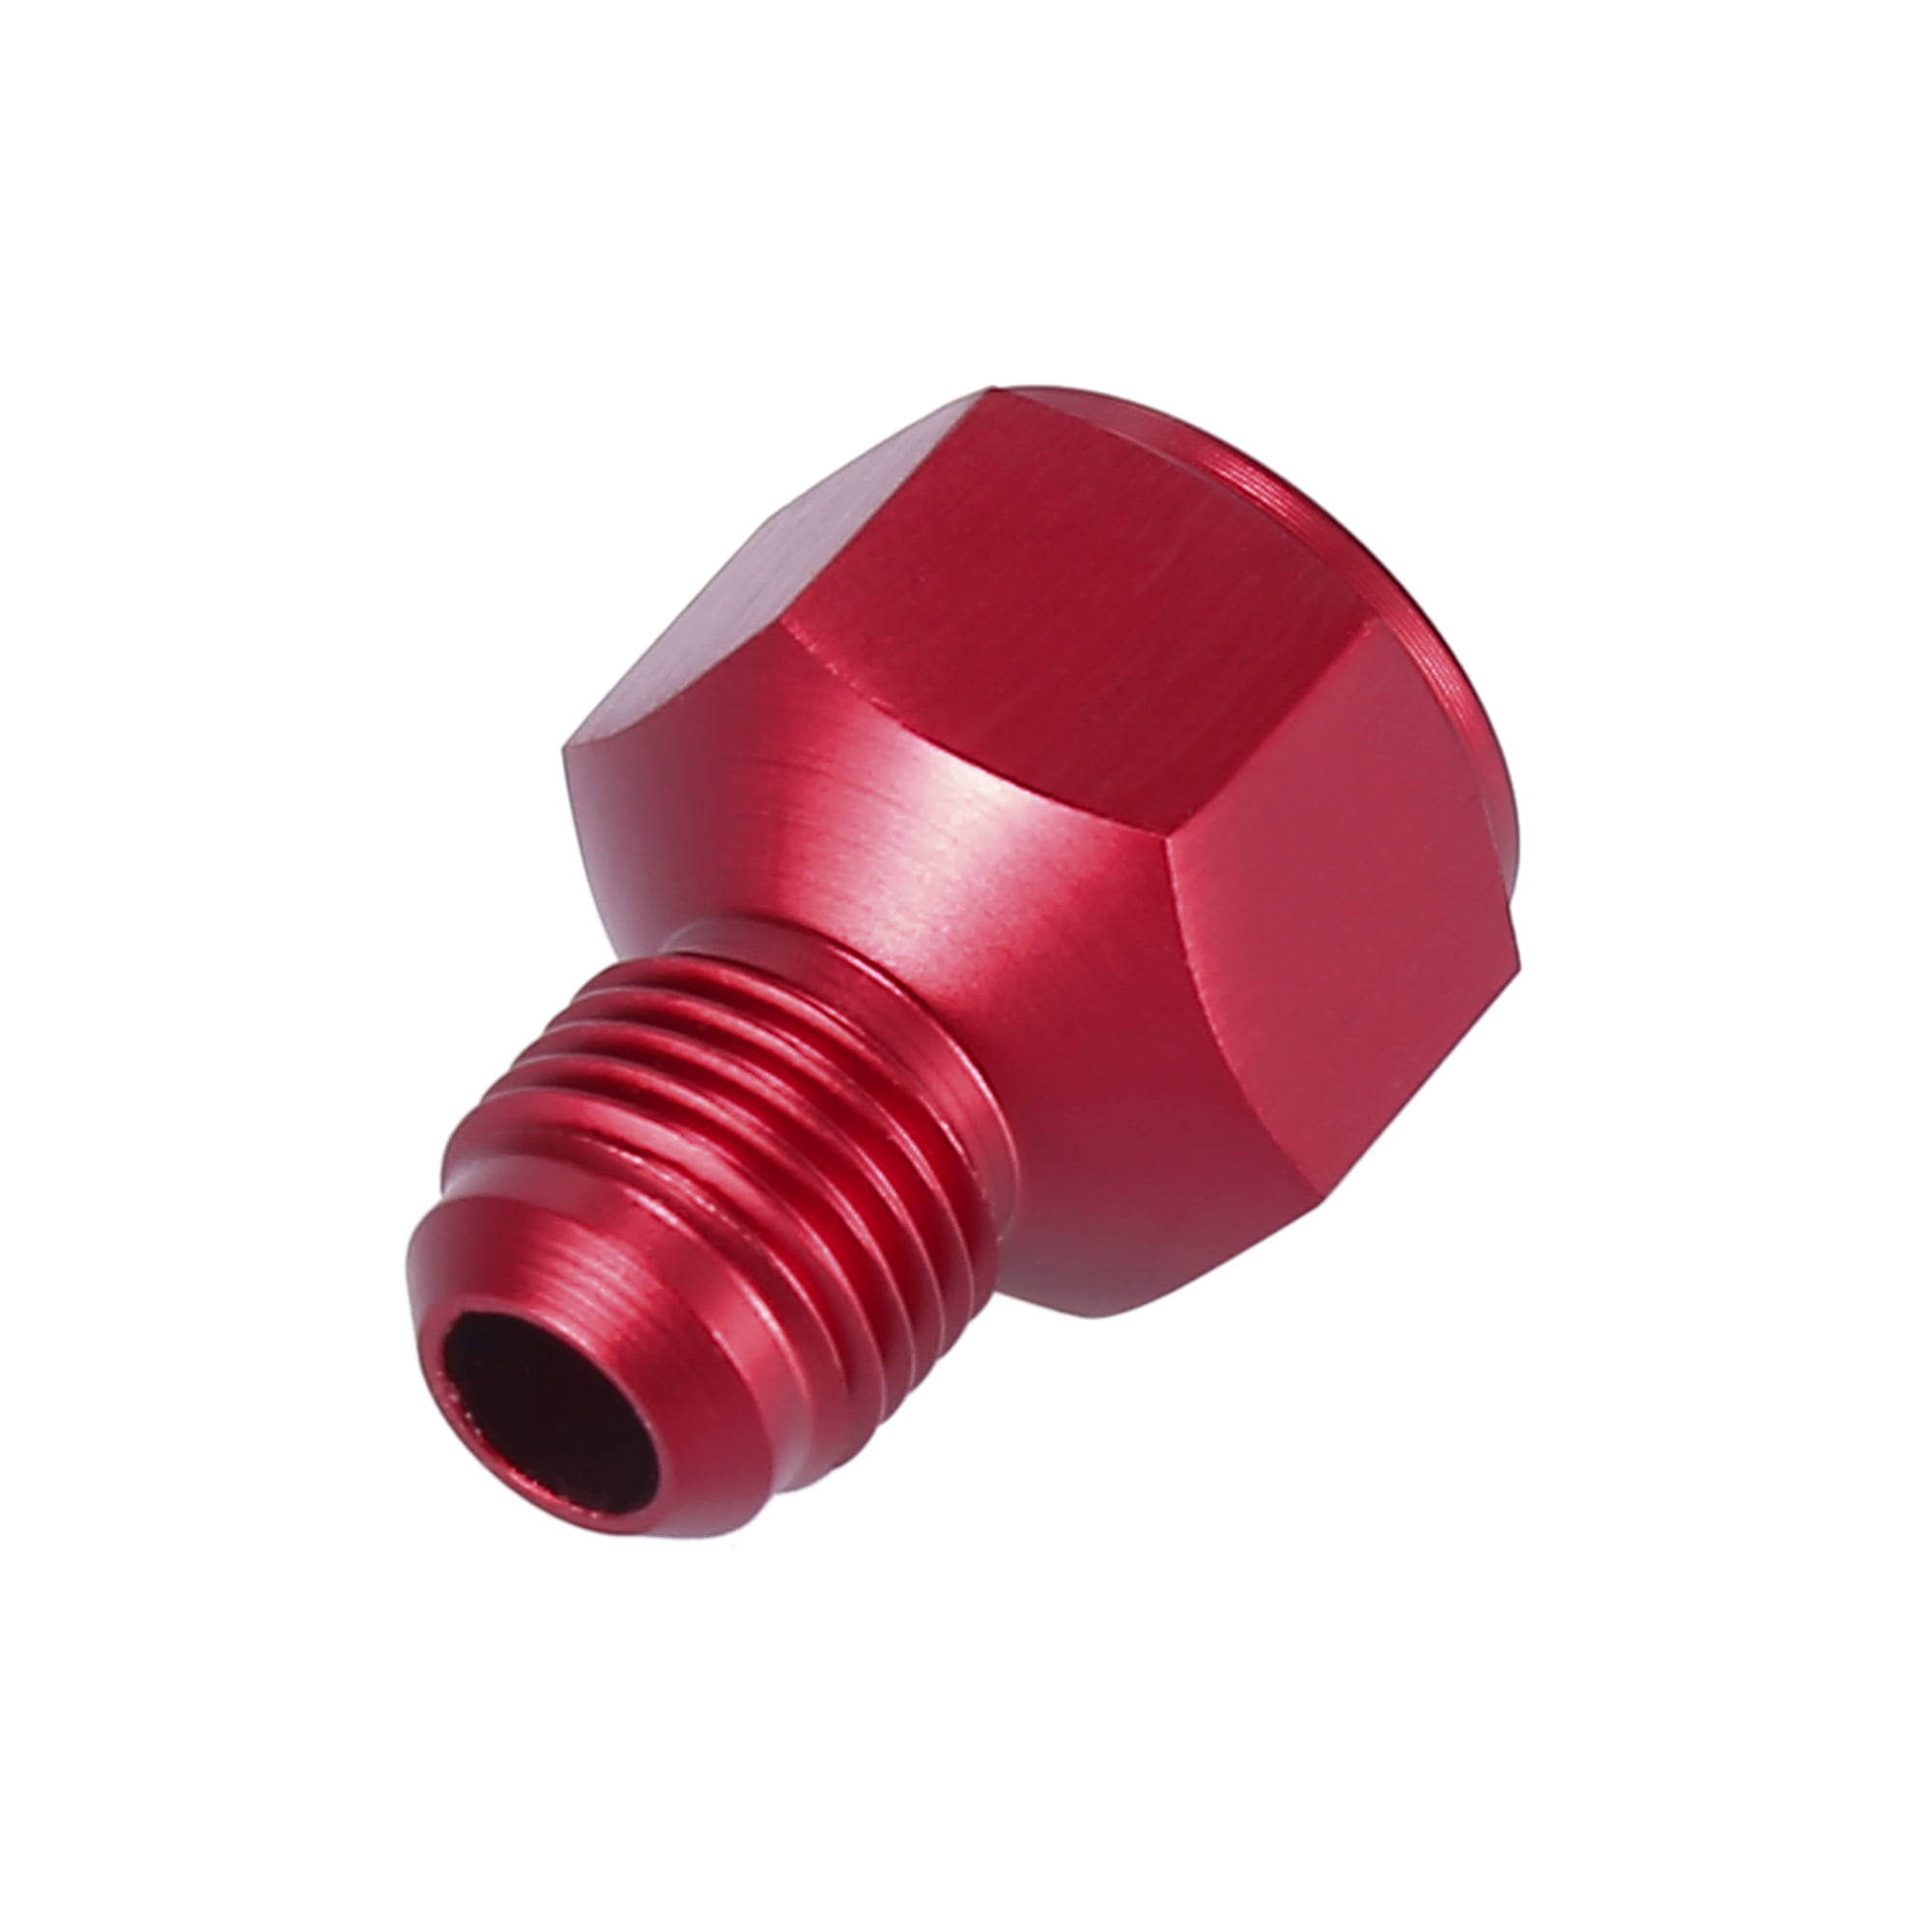 6AN AN6 1/4-18 NPT OIL/FUEL LINE HOSE MALE/FEMALE UNION FITTING CONNECTOR RED 